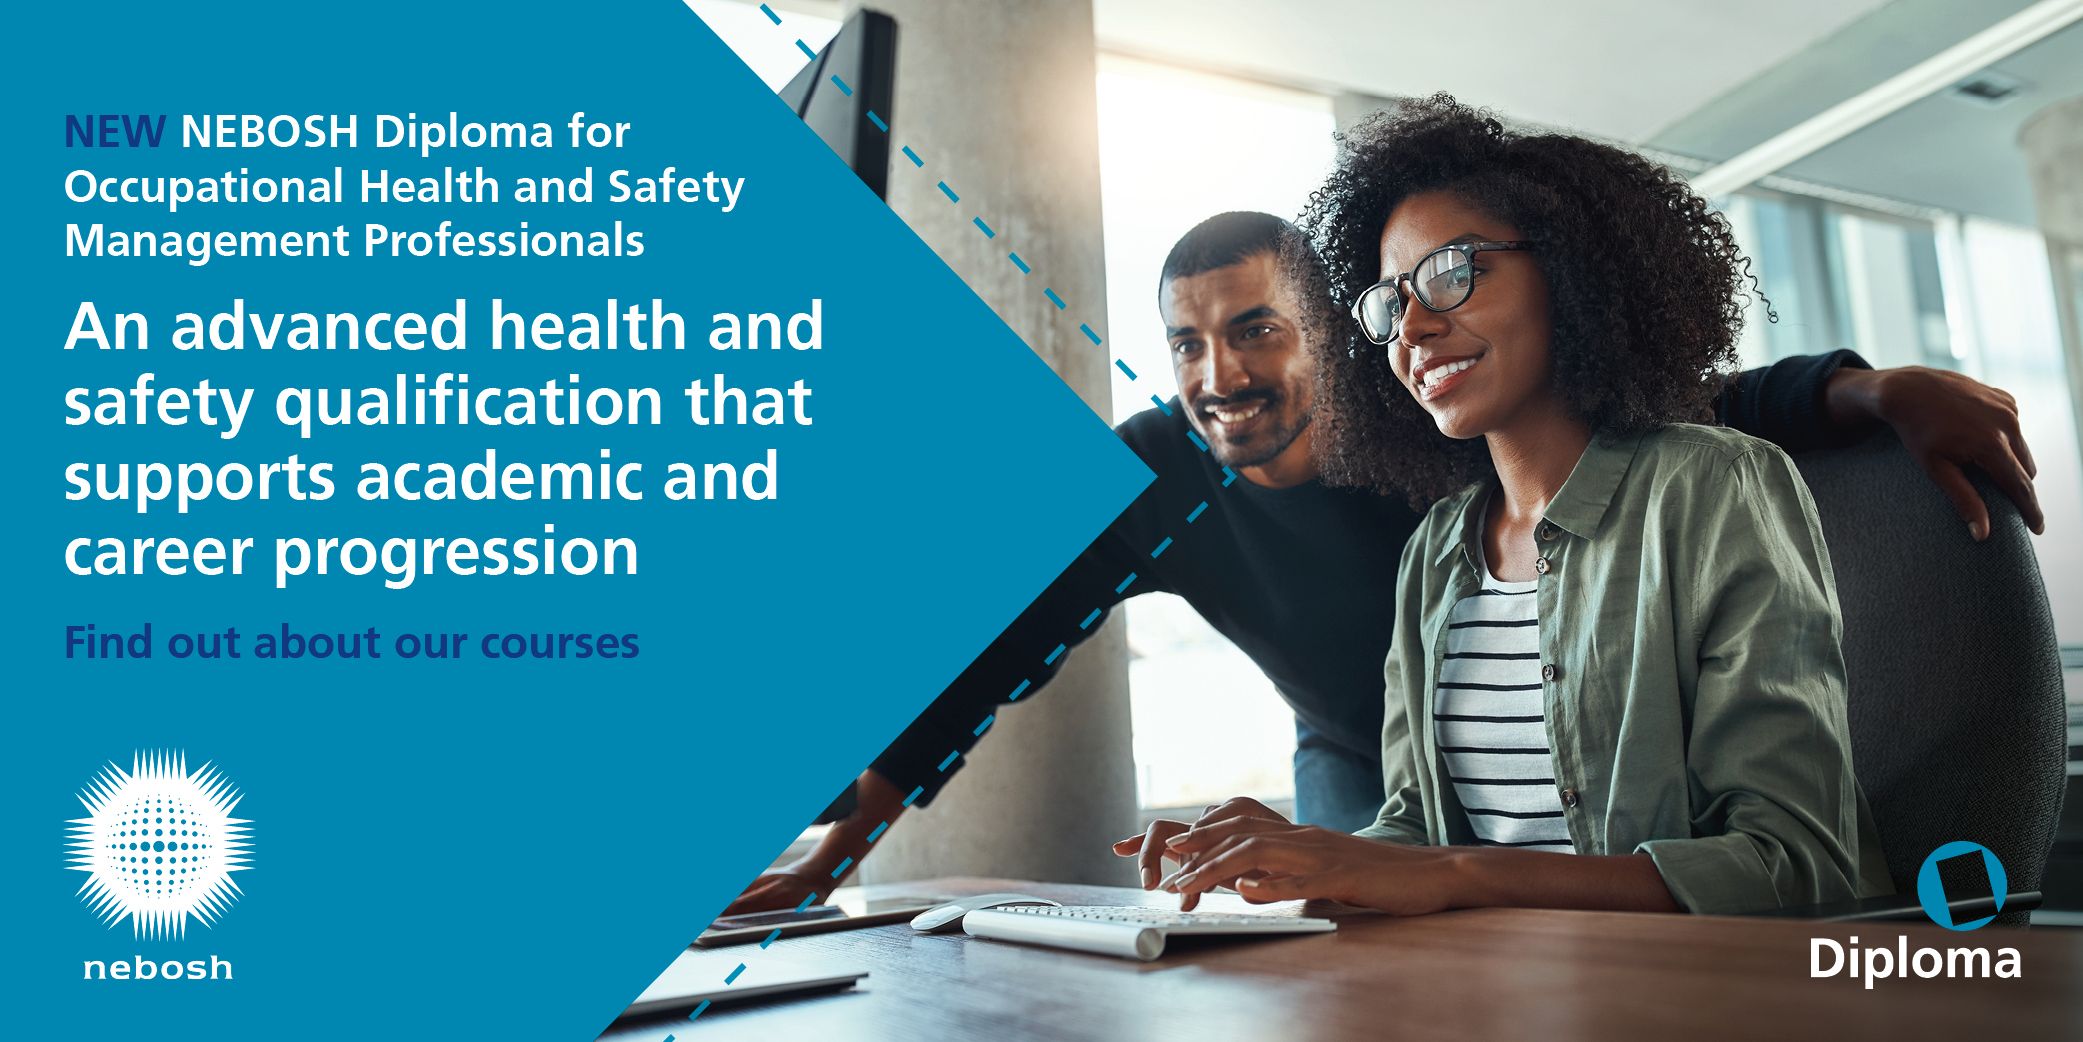 New NEBOSH diploma prepares leading health and safety professionals of the future